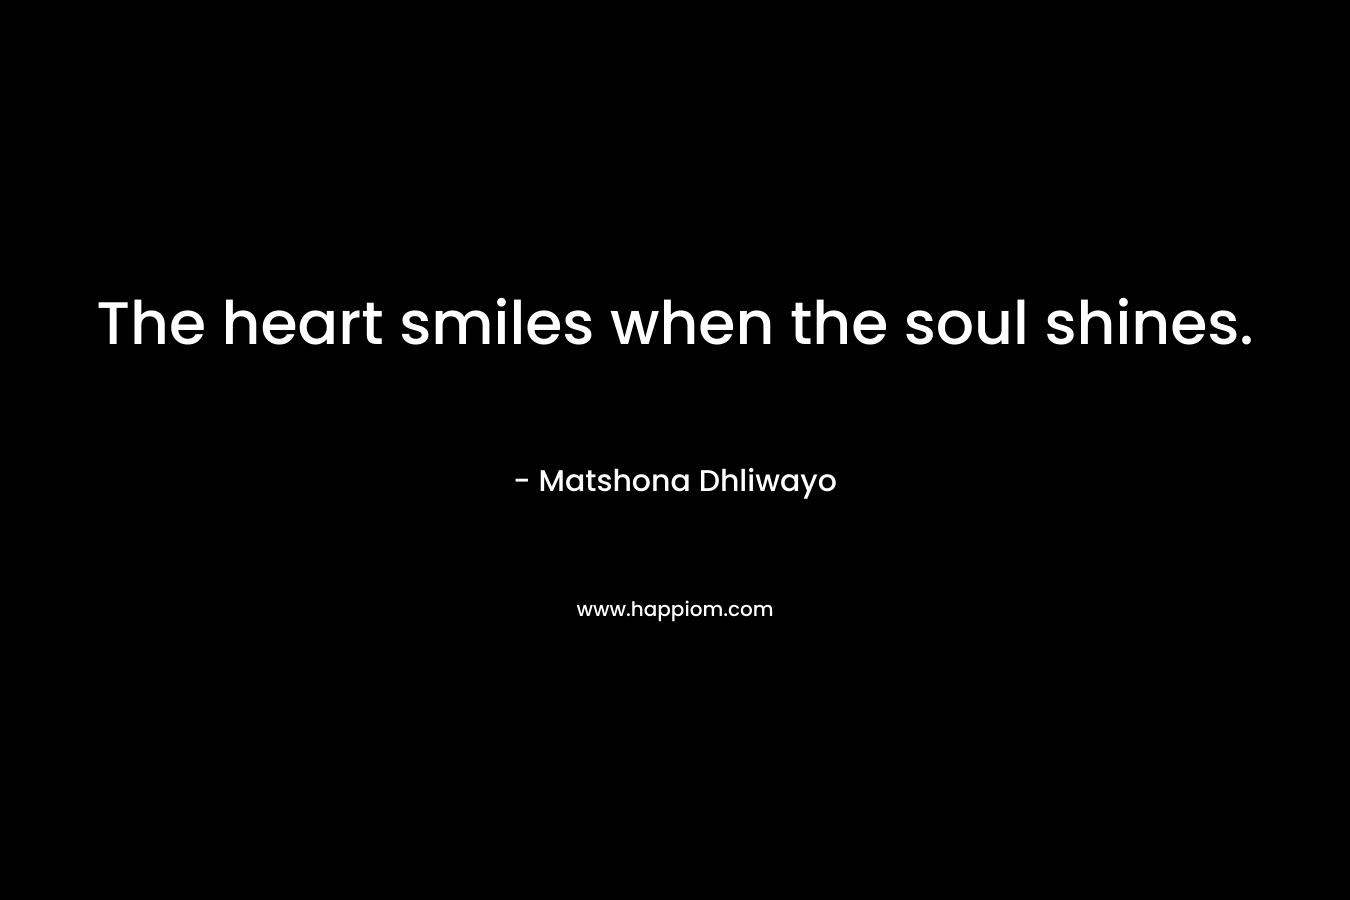 The heart smiles when the soul shines.